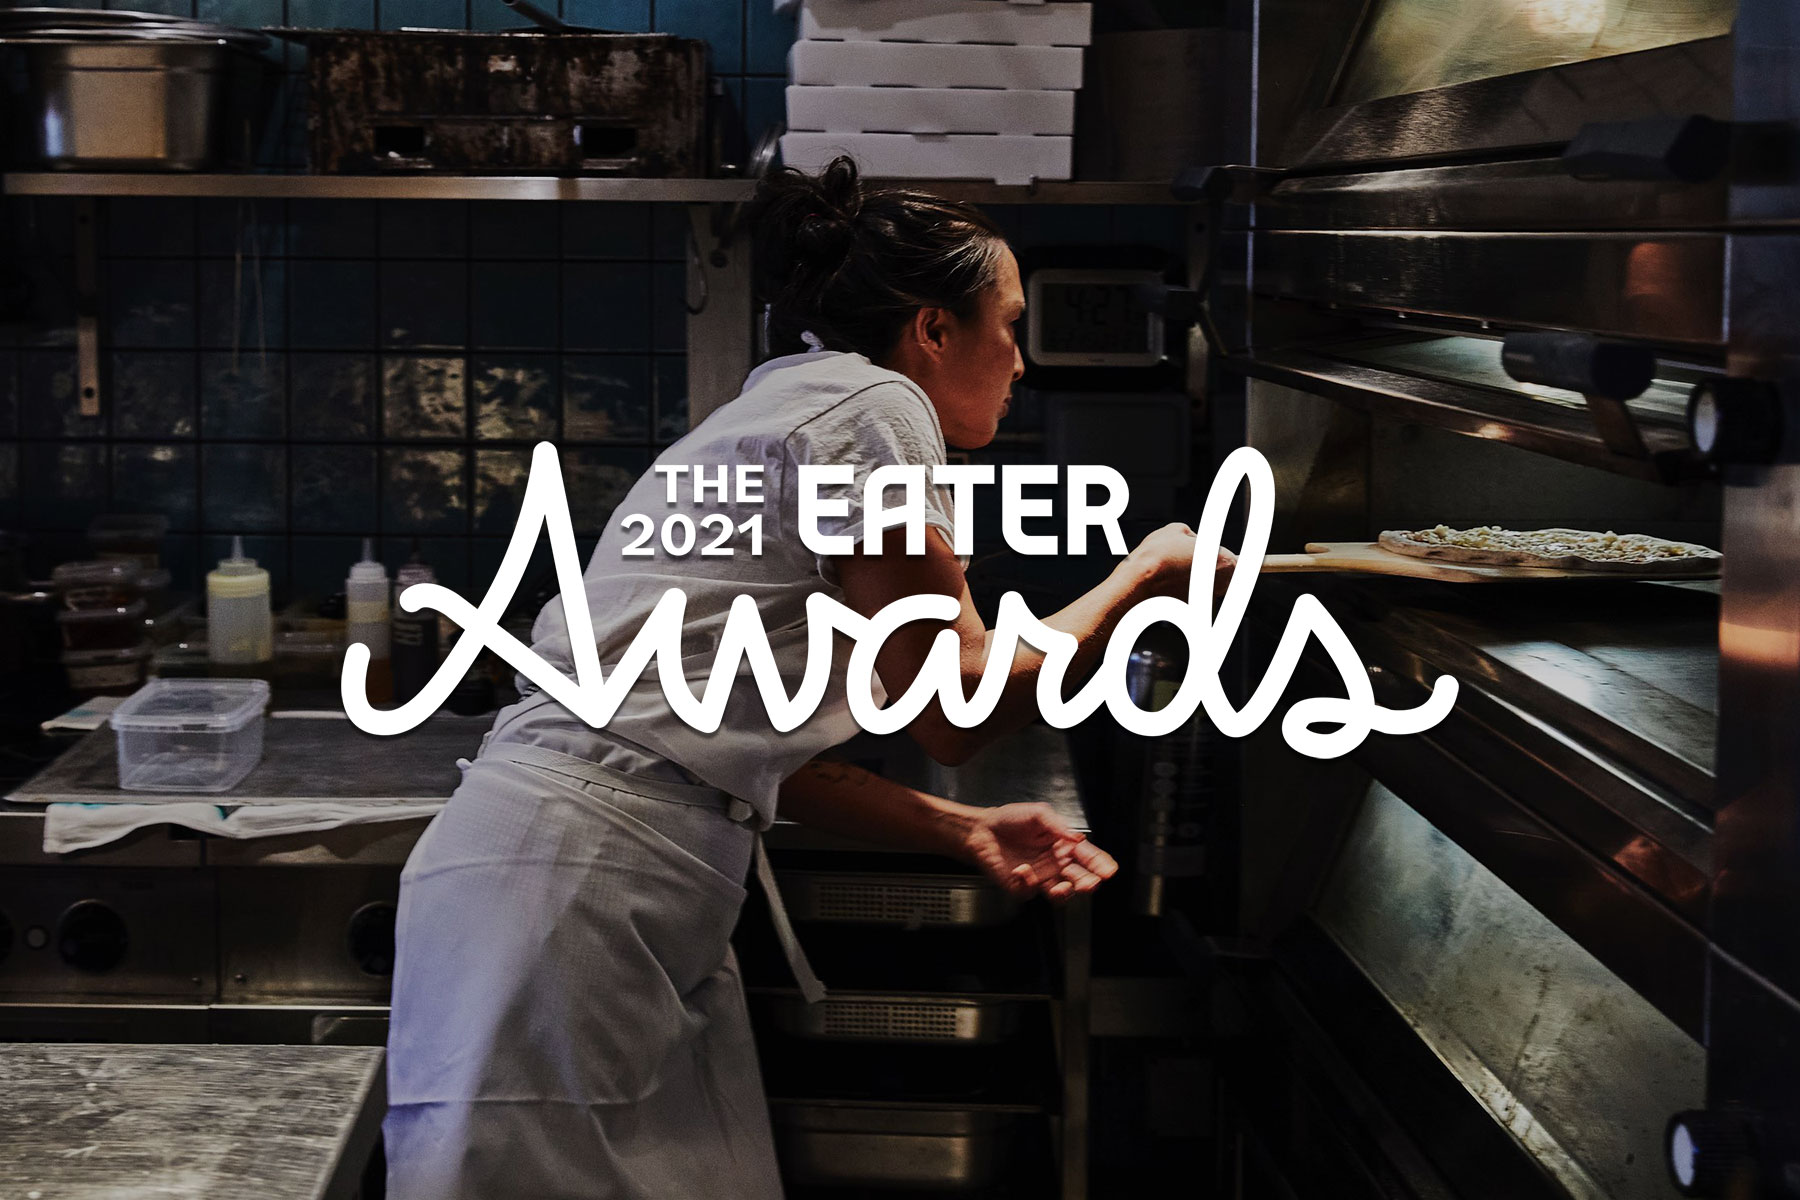 Eater London Awards 2021 overlaid on a photo of chef Pam Yung removing a pizza from an overn when Flor Bakery in Borough was ASAP Pizza through lockdown 